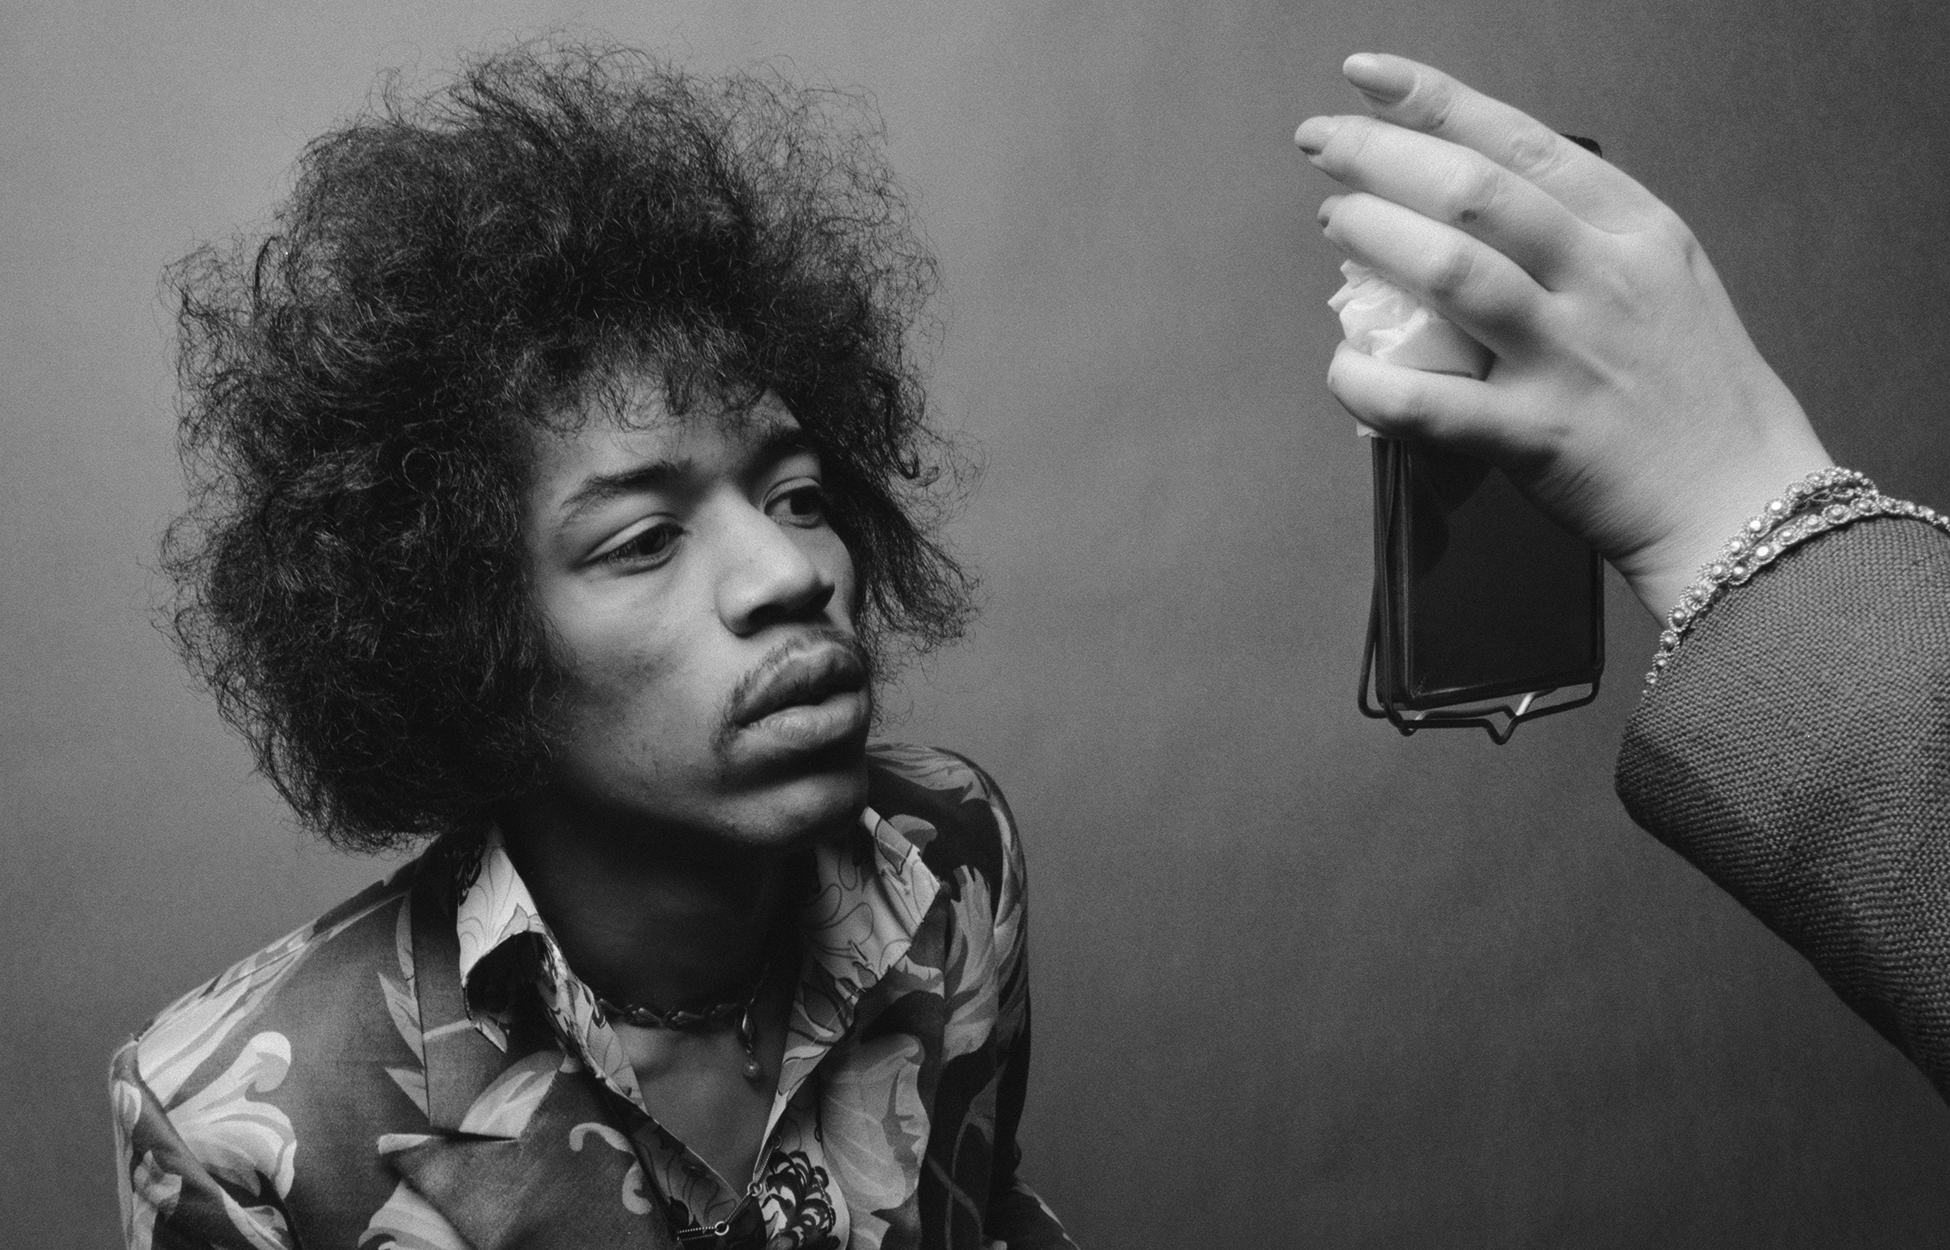 🔥 Download Jimi Hendrix Wallpaper Image Photos Pictures Background By Johnr25 Jimi Hendrix